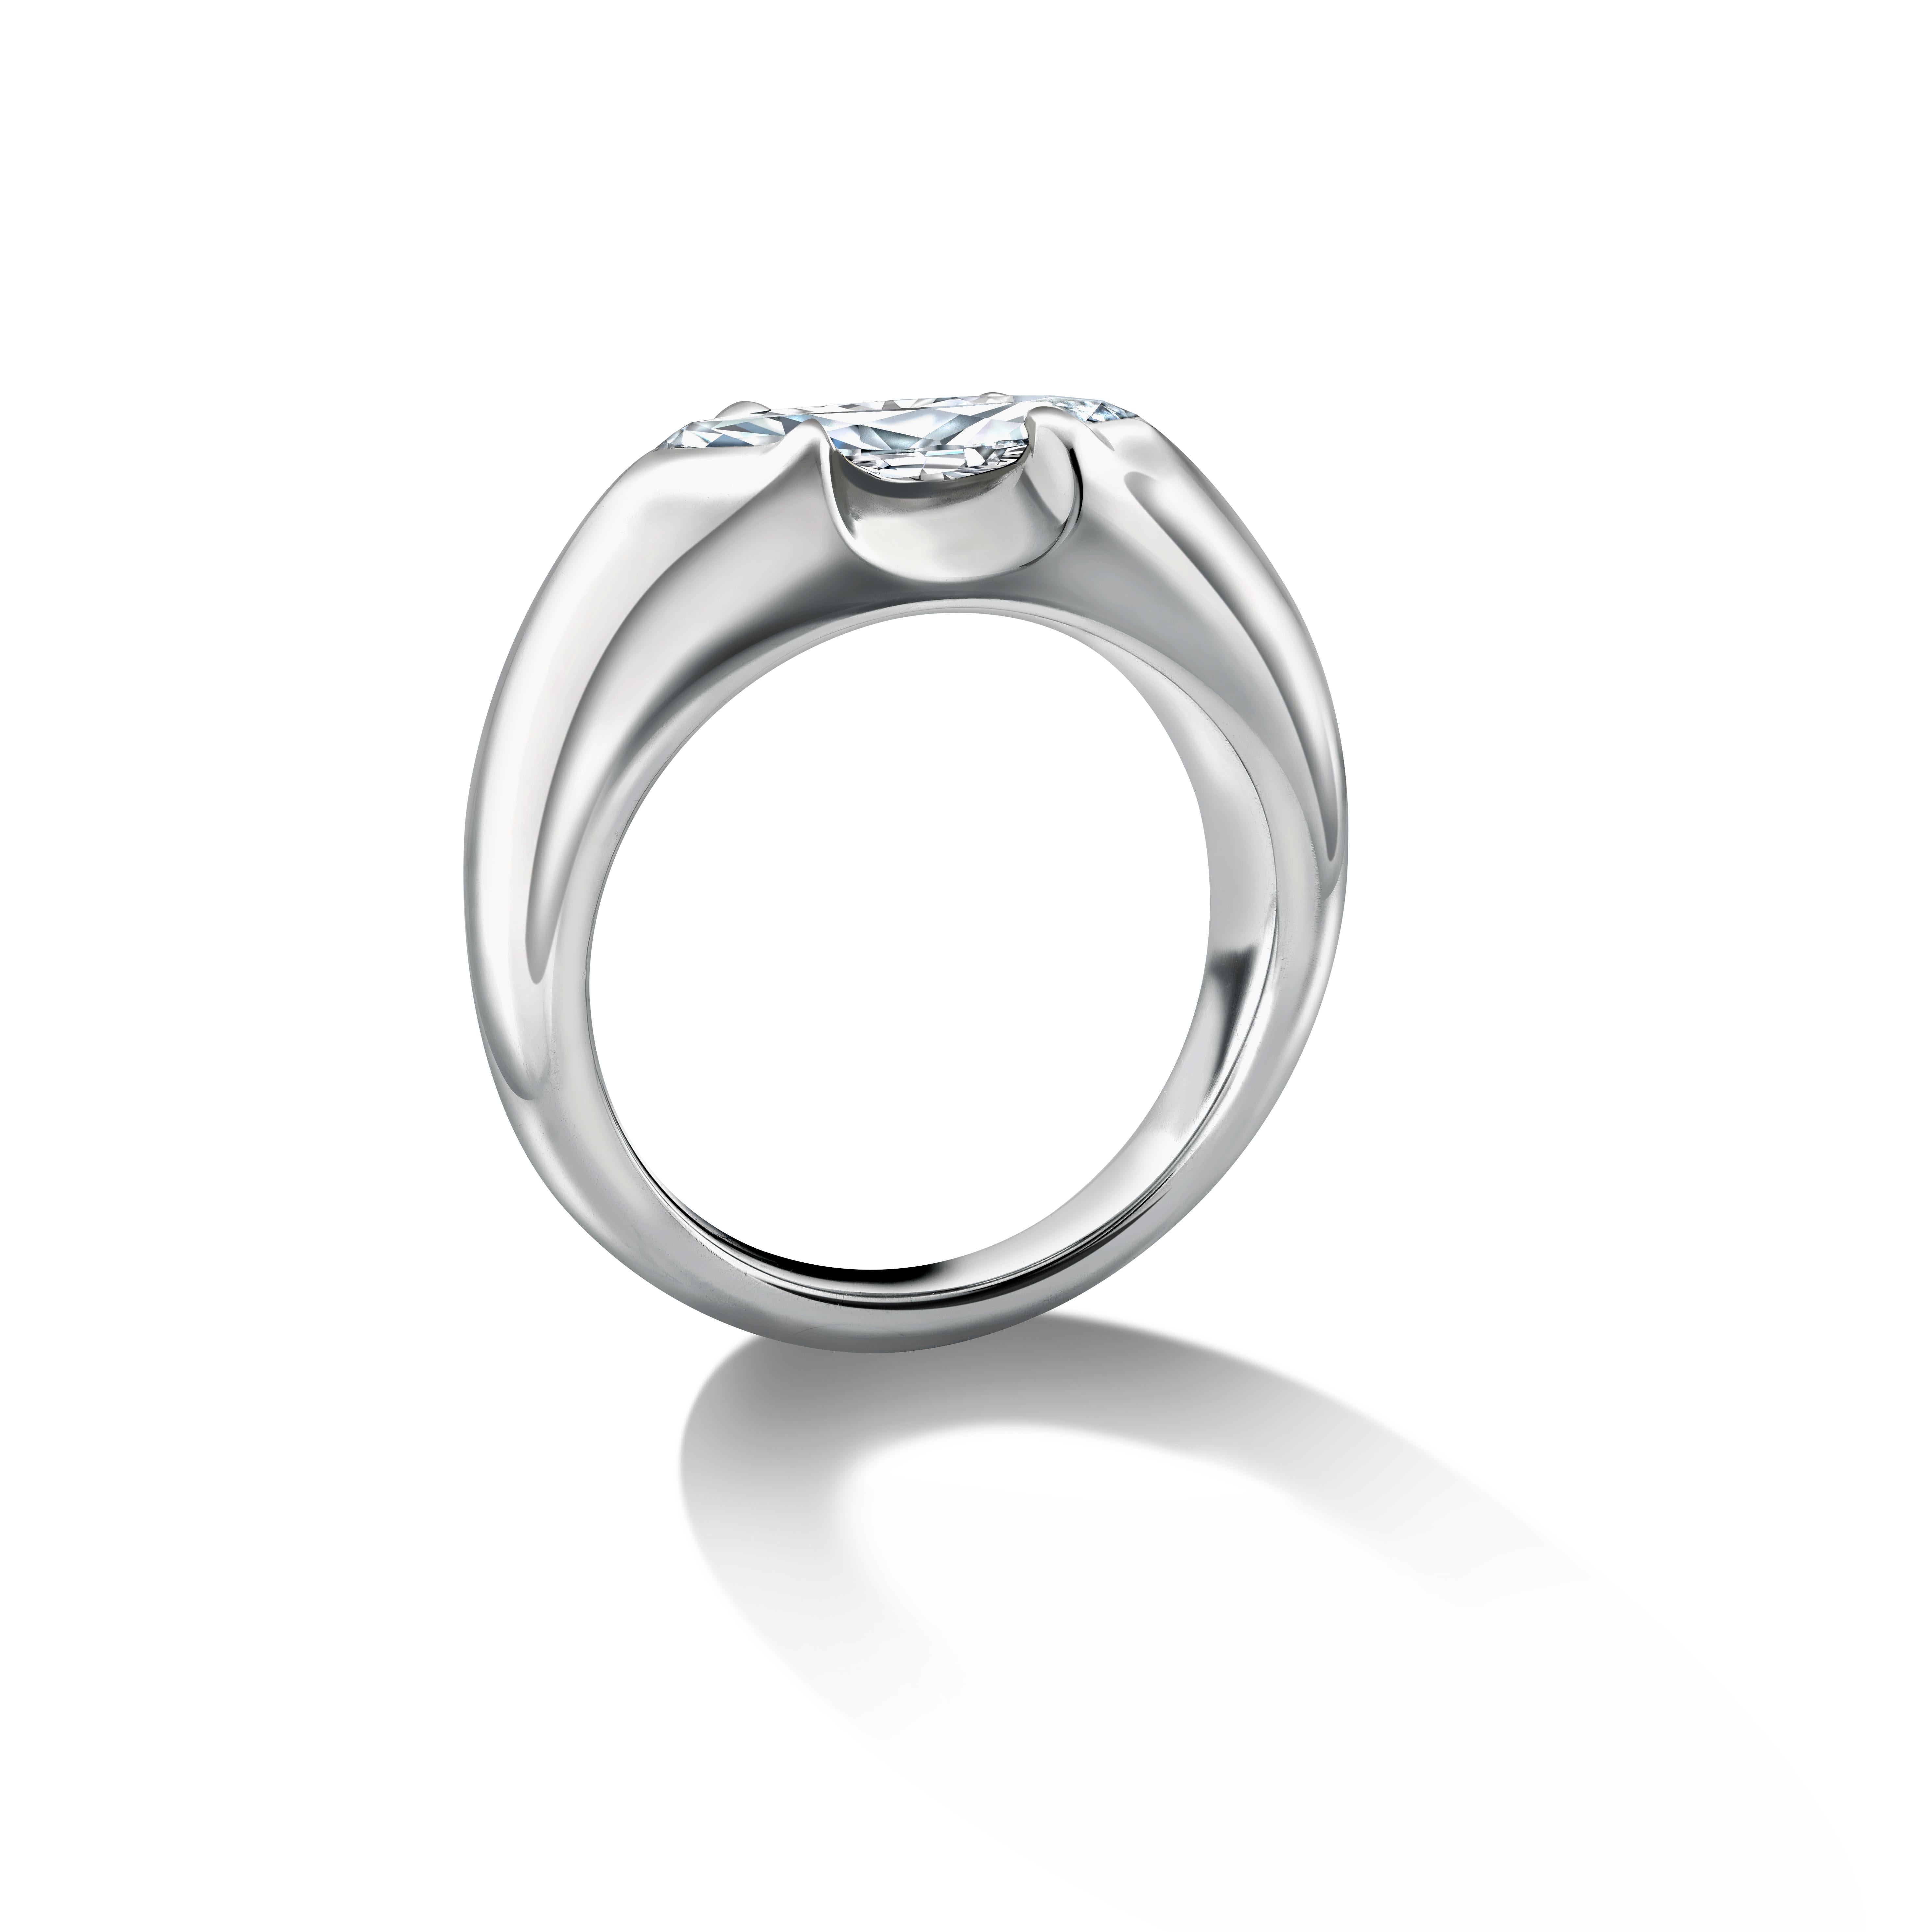 For Sale:  SPEAR TIP RING  White gold with a marquise diamond at the centre by Liv Luttrell 2